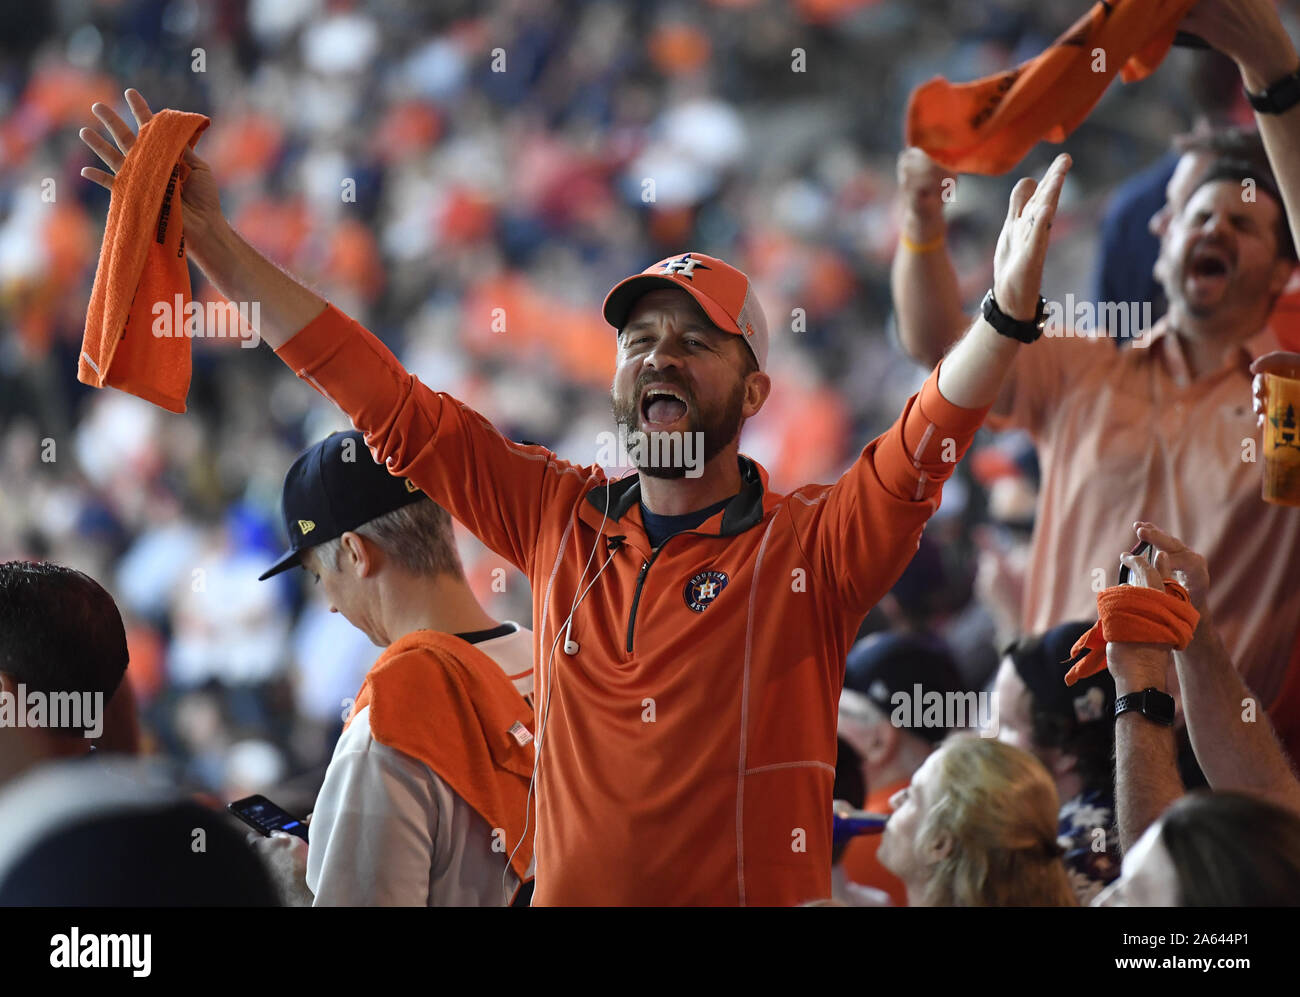 Houston, United States. 23rd Oct, 2019. Houston Astros fans shout in the sixth inning of Game 2 of the World Series against the Washington Nationals at Minute Maid Park in Houston, Texas on Wednesday, October 23, 2019. The Nationals lead the best-of-seven series 1-0. Photo by Trask Smith/UPI Credit: UPI/Alamy Live News Stock Photo